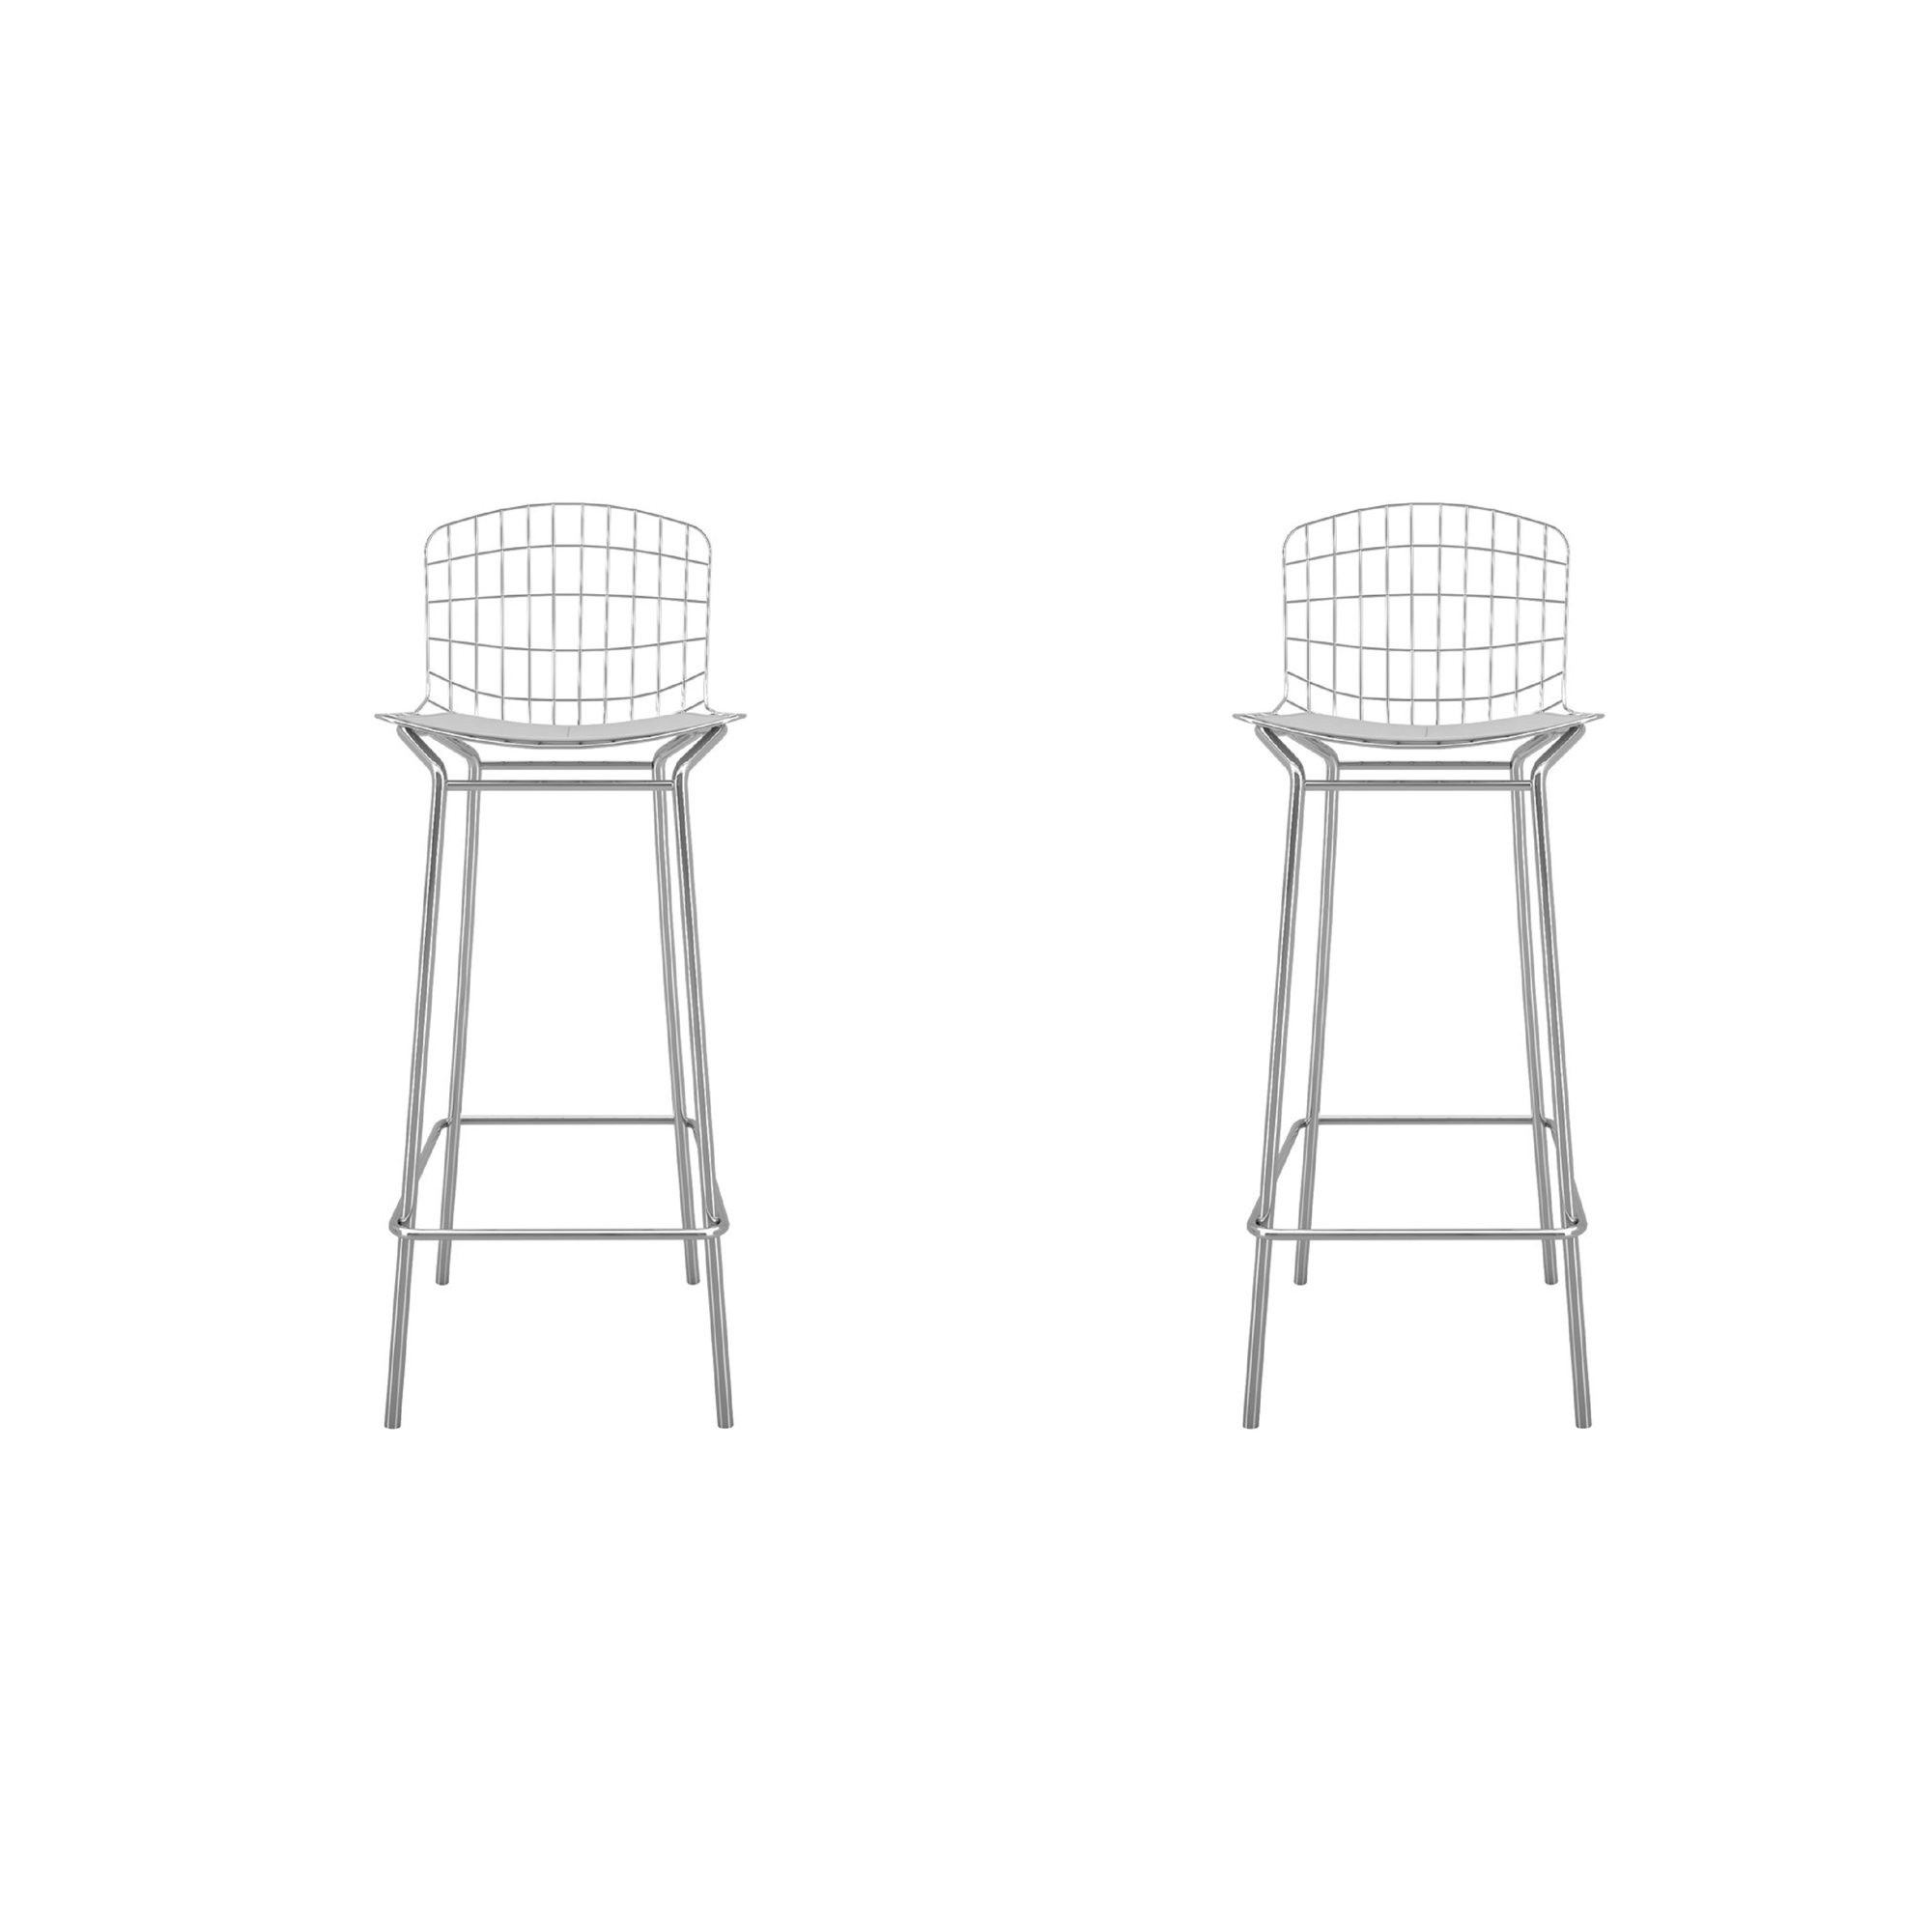 Manhattan Comfort, Madeline 41.73Inch Stool, Set of 2 Silver and White, Primary Color White, Included (qty.) 2 Model 2-198AMC